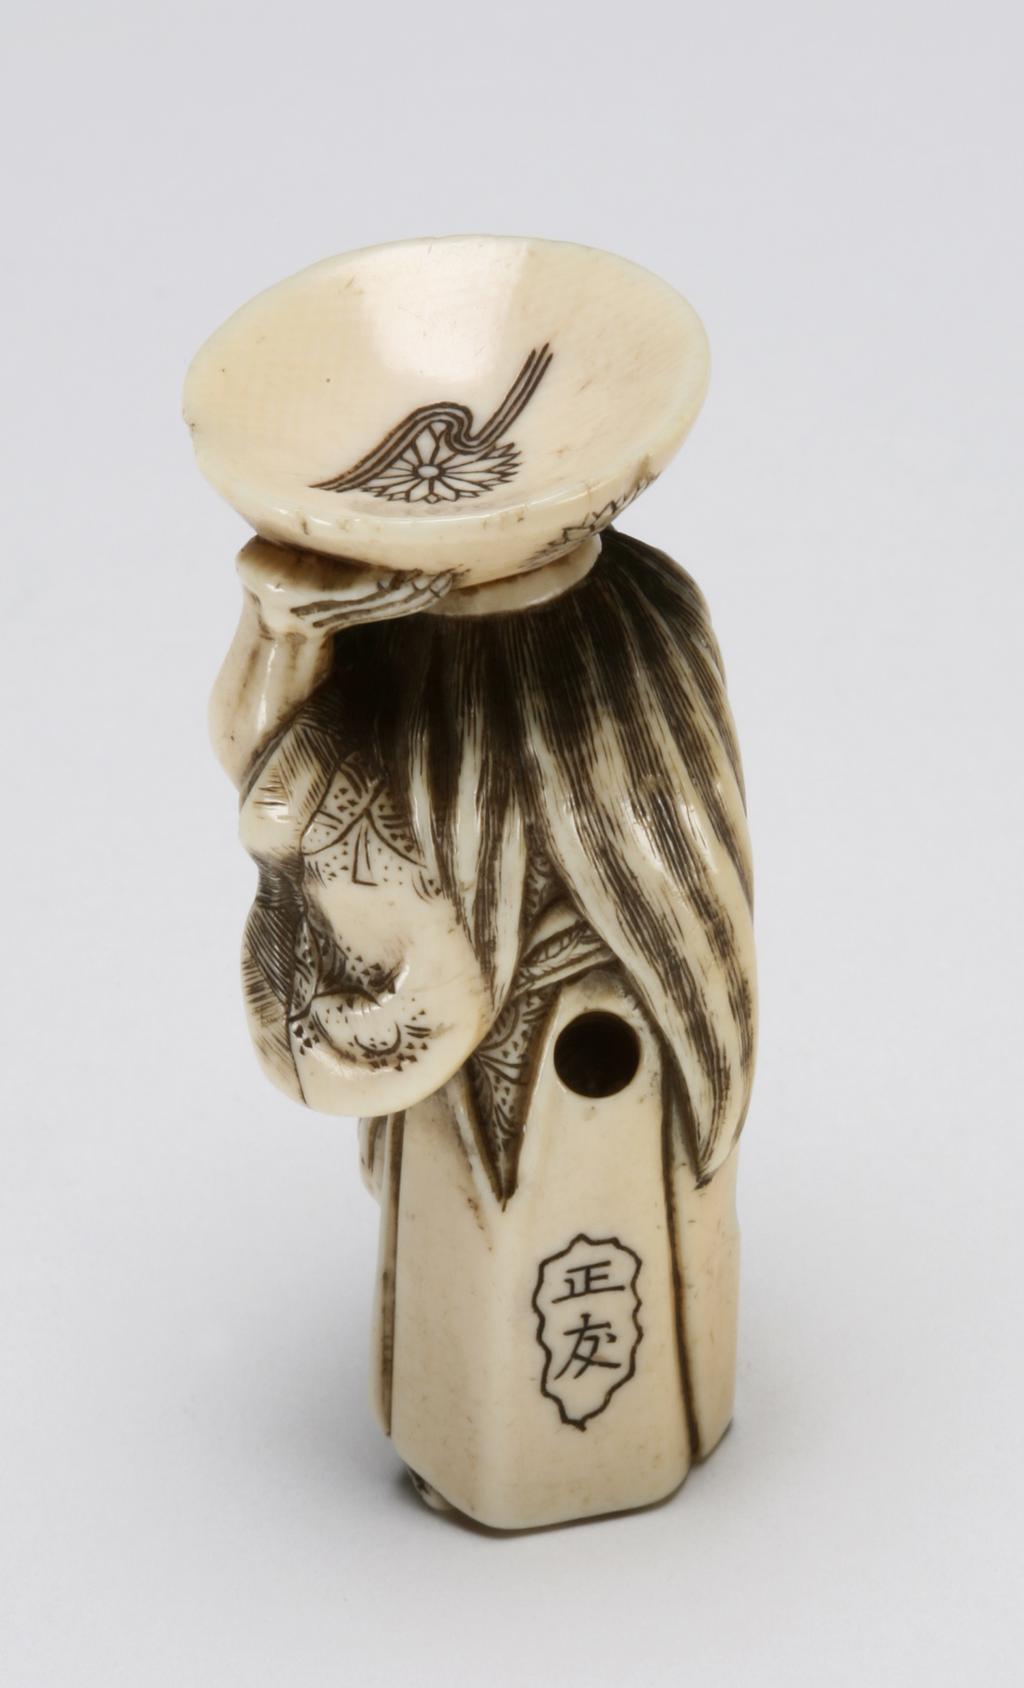 An image of Netsuke. A Shōjō, mythical creature addicted to alcohol, with long hair and a sake cup on its head. Shōyu (Japanese). Ivory, with incised and stained detail, height 5.5 cm. Acquisition Credit: Marlay Bequest.